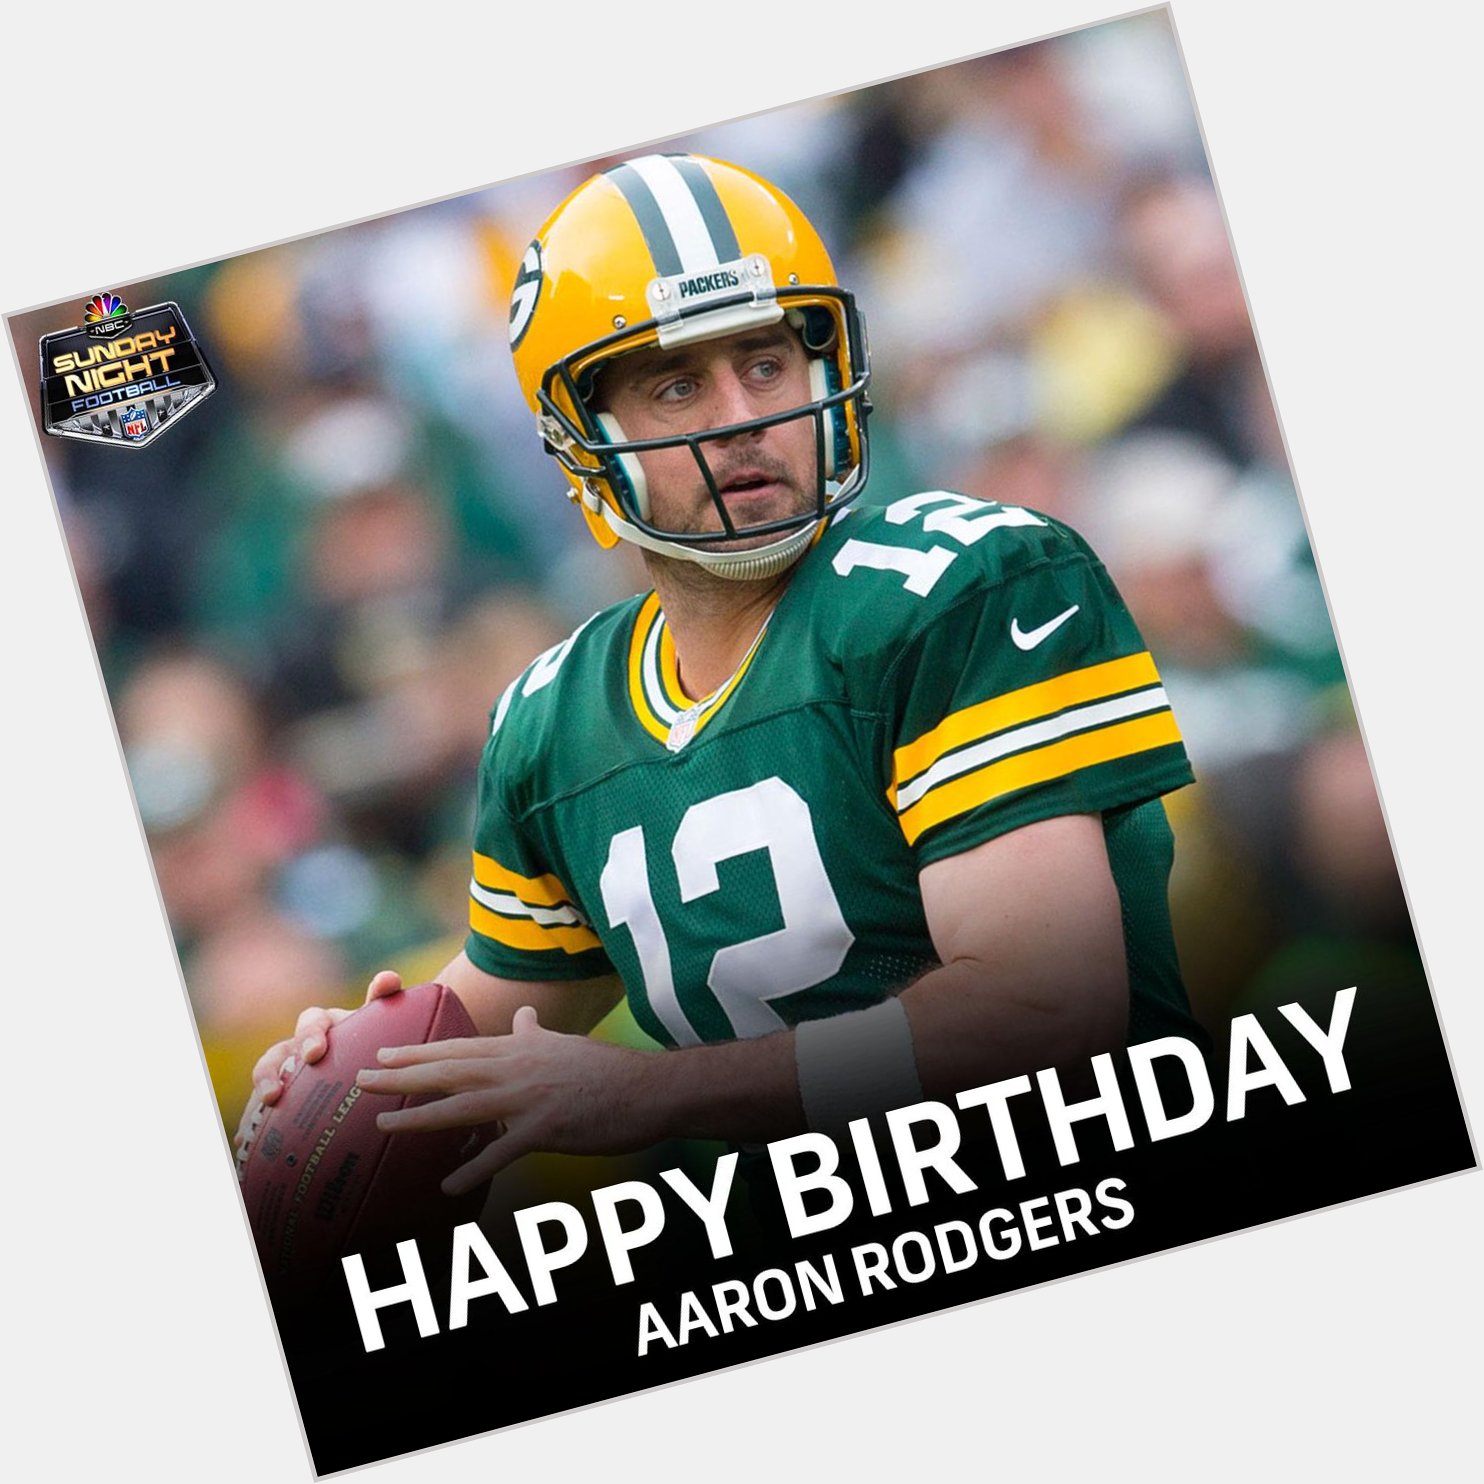 The only one, Aaron Rodgers The Relaxer!
Happy Birthday from me too!  Happy Birthday 